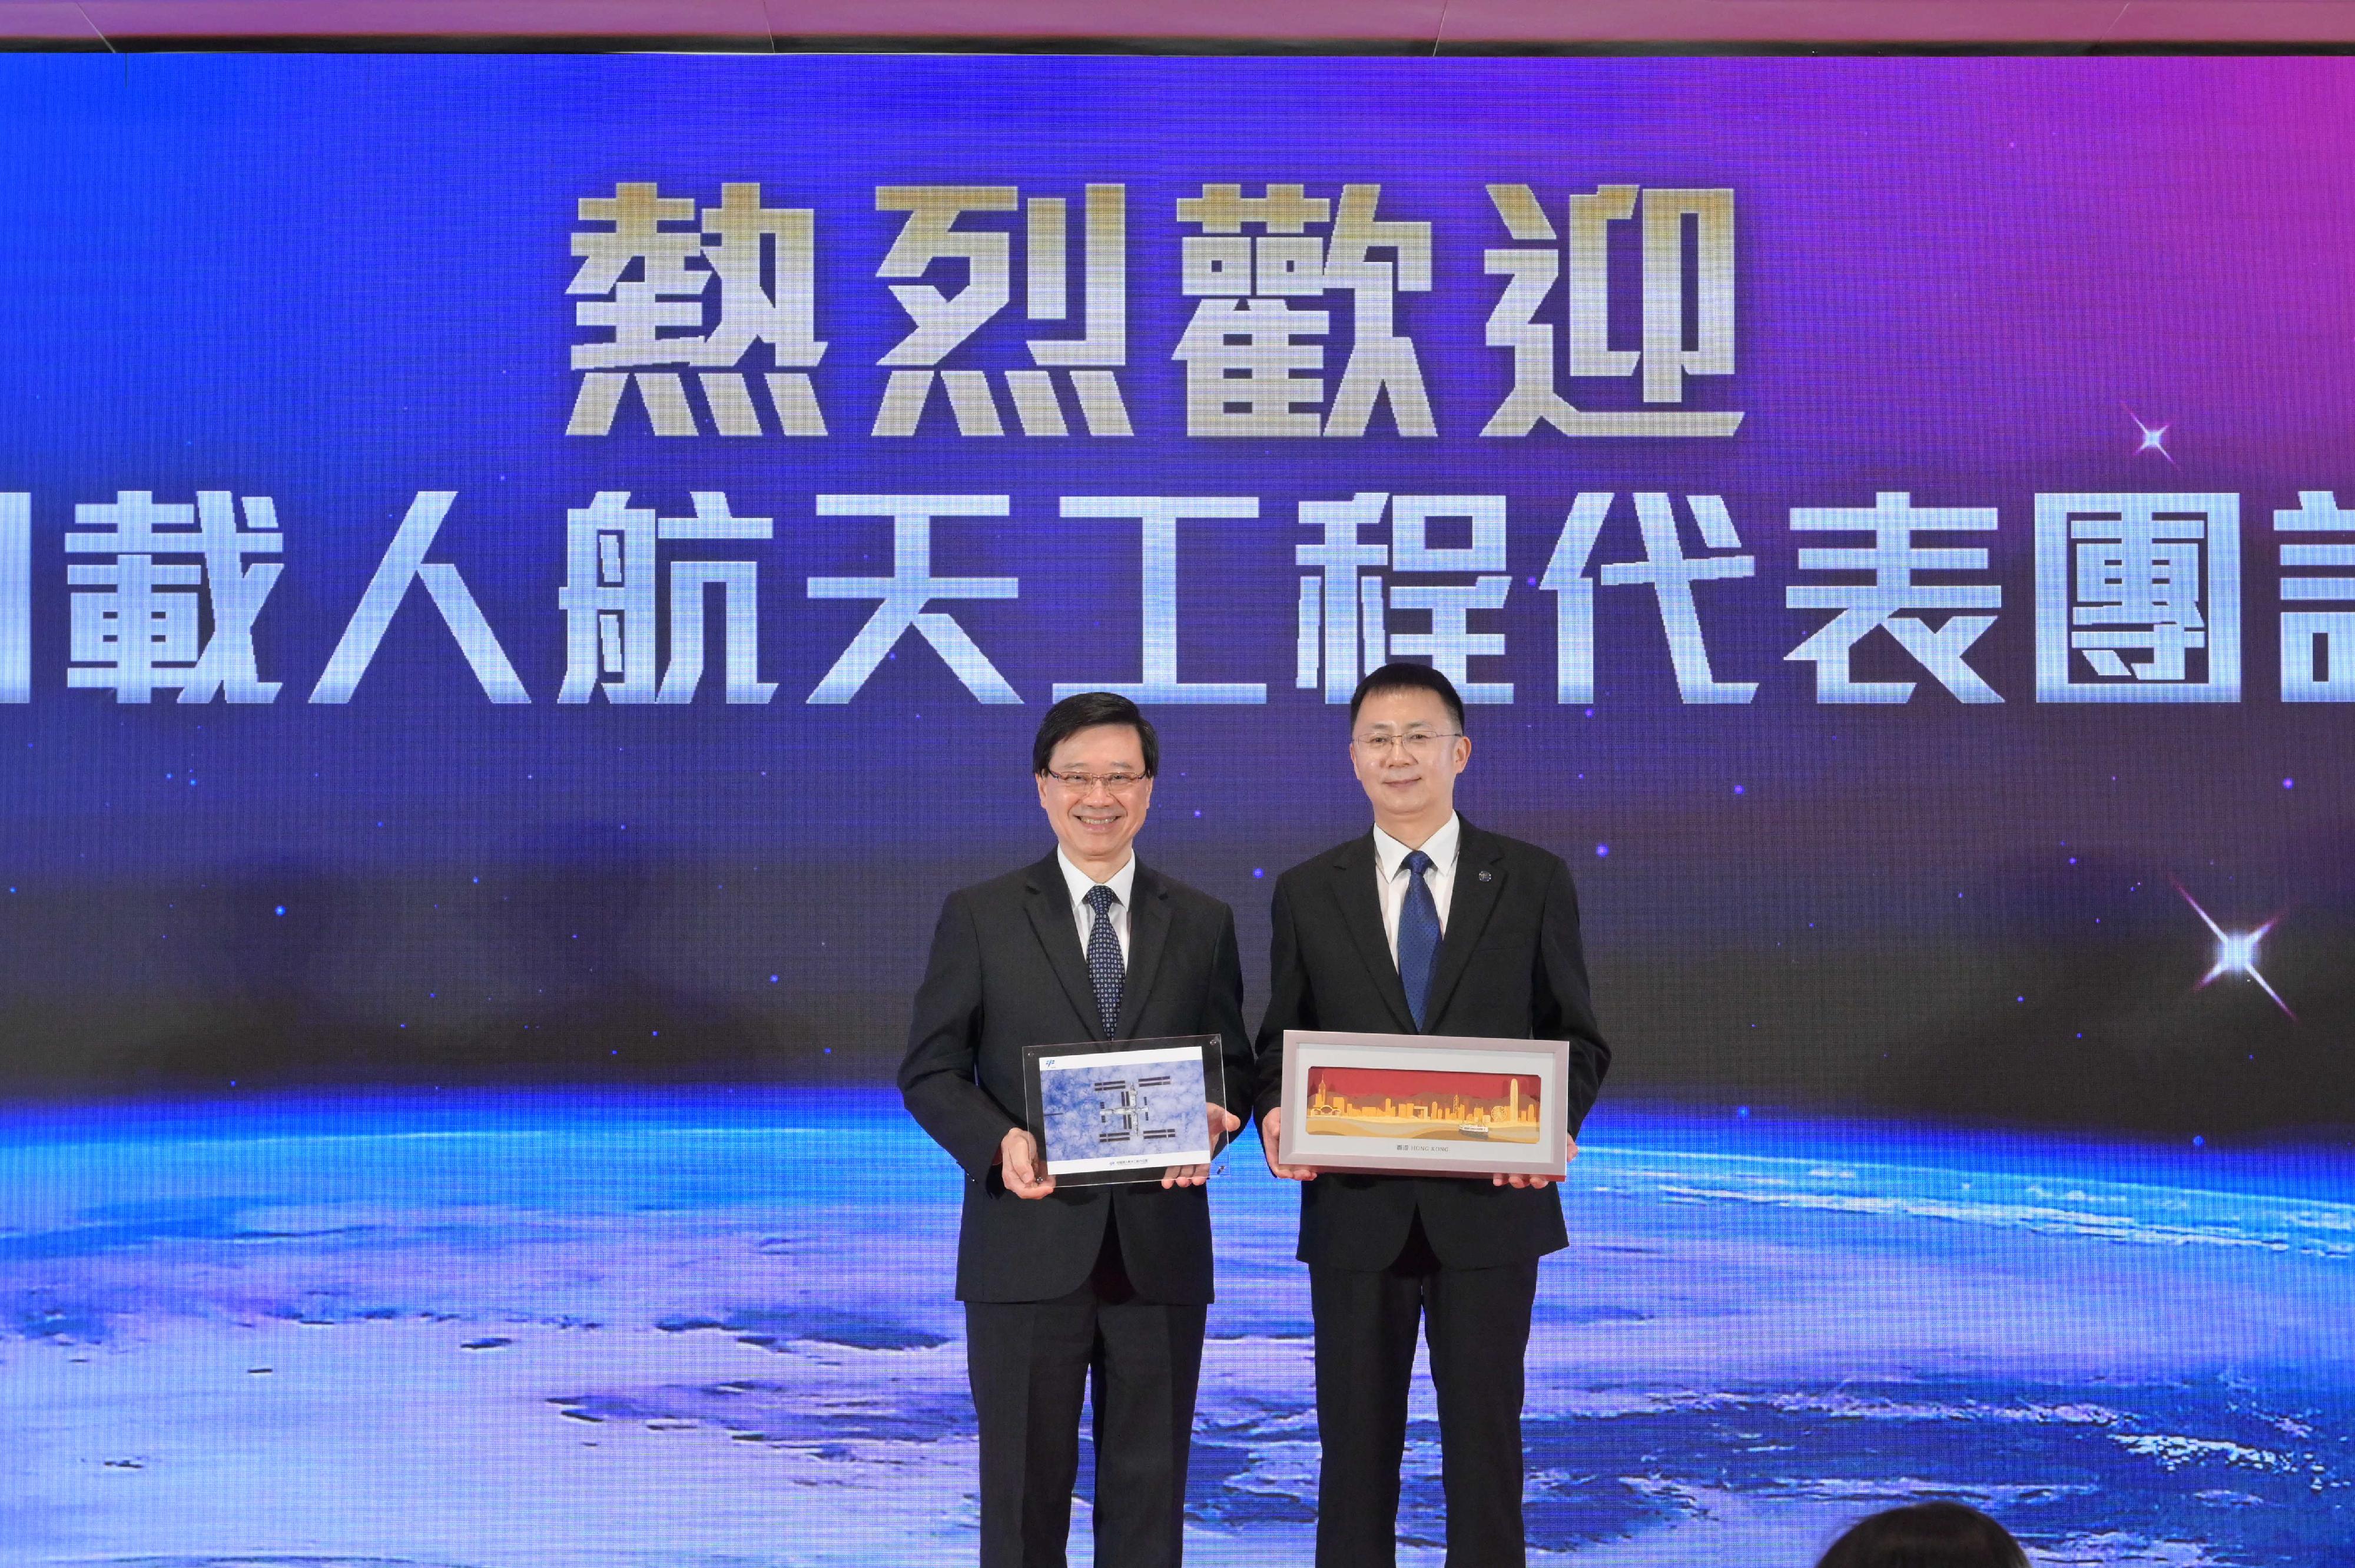 A China Manned Space delegation arrived in Hong Kong for a four-day visit today (November 28). Photo shows the Chief Executive, Mr John Lee (left) and the leader of the delegation and the Deputy Director General of the China Manned Space Agency, Mr Lin Xiqiang (right), exchanging souvenirs.